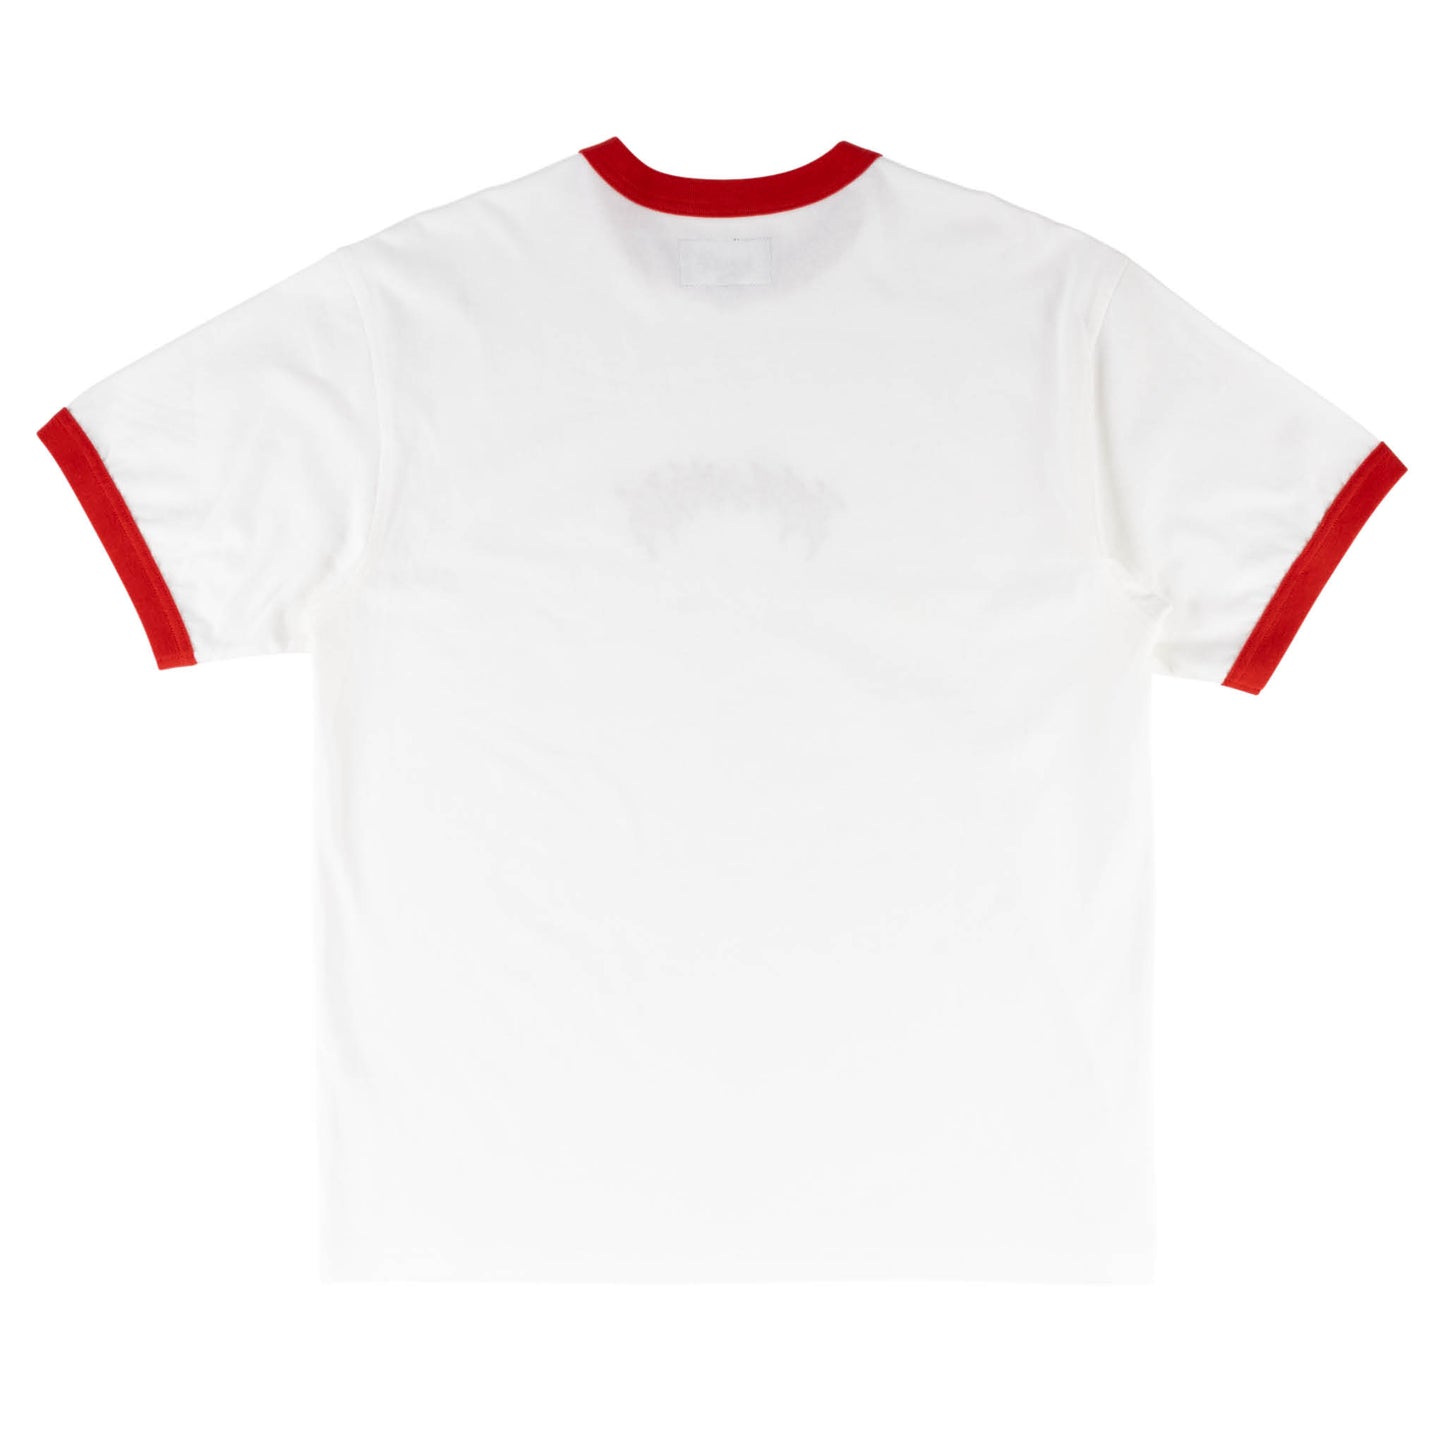 Welcome Barb Ringer Short Sleeve T-Shirt - White/Red